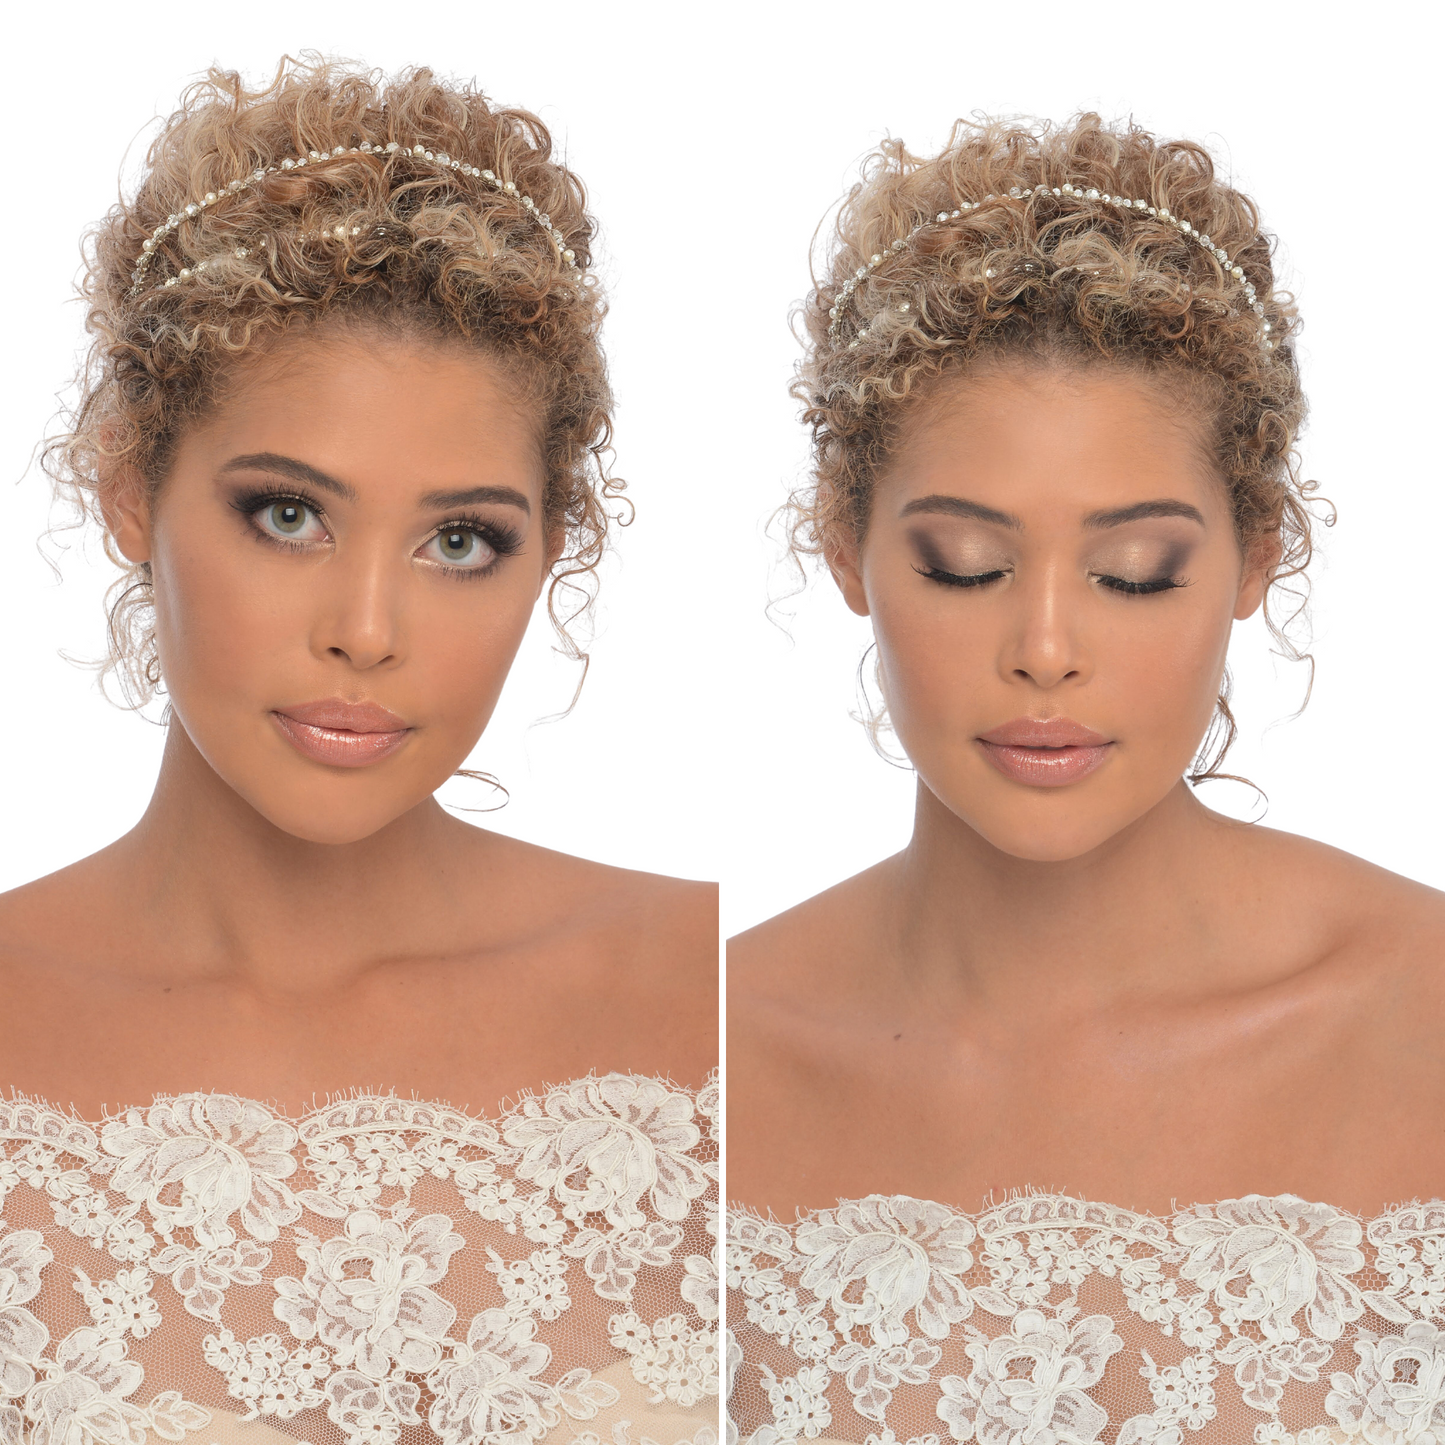 Shimmer and Gold Bridal Makeup Collection